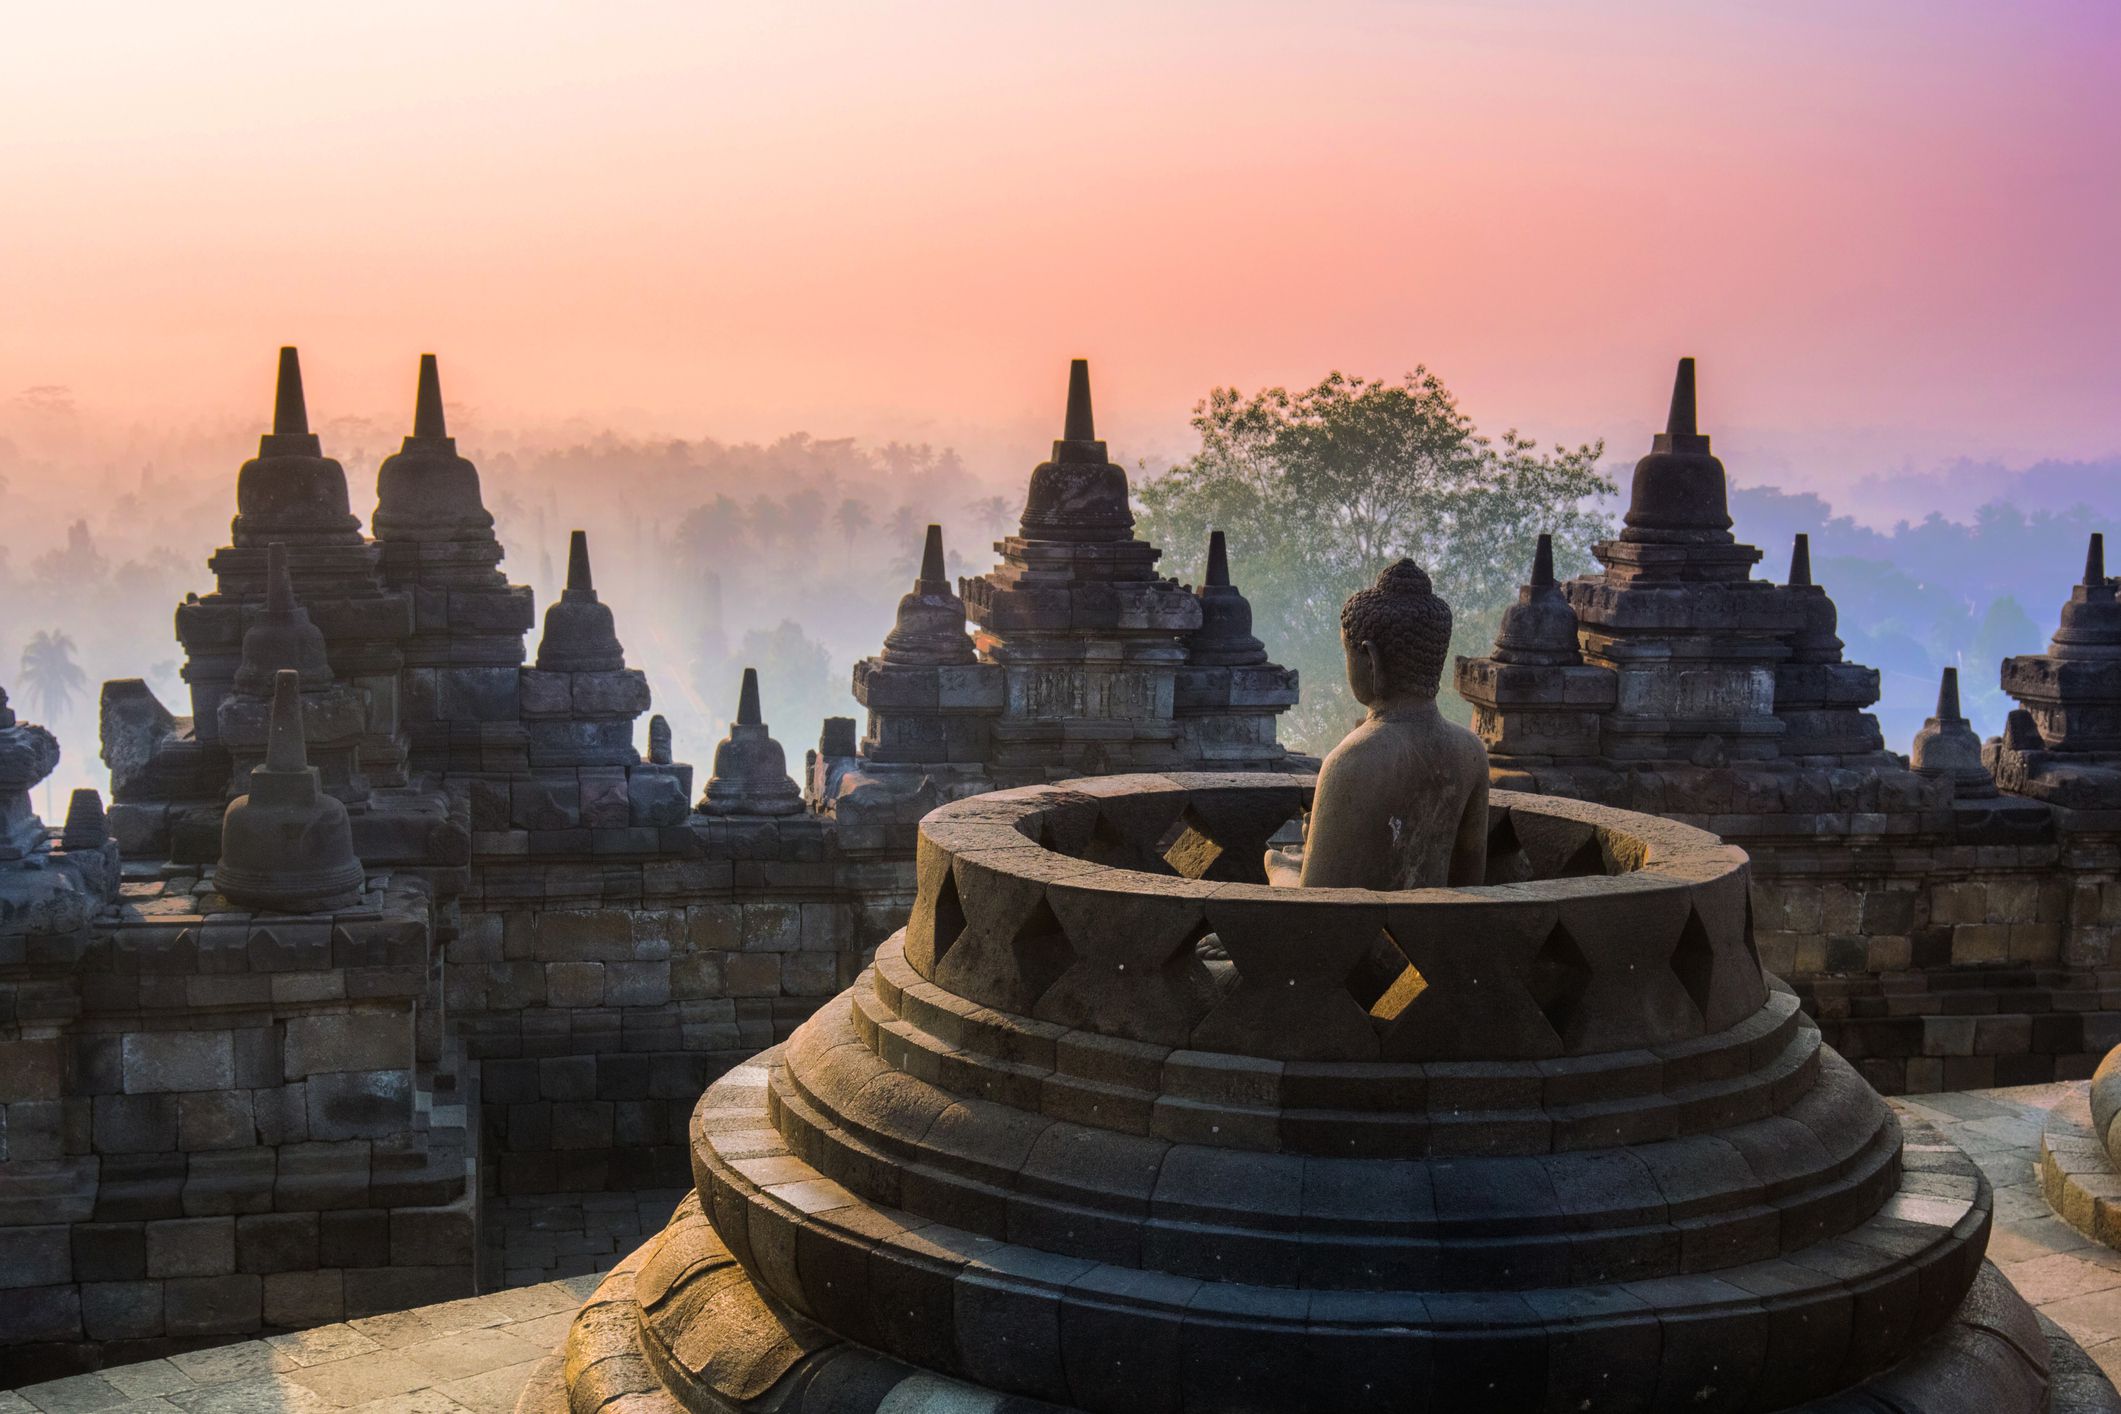 <p><b>Average Star Review</b>: 4.621</p><p>Catching the sunset at Borobudur might make you feel like an adventurer discovering a lost world. The temple’s silhouette against the evening sky is Instagram gold. There are <a href="https://www.javaheritagetour.com/visit-borobudur-temple-at-sunset/">sunset tours at the temple t</a>hat include hotel pick-up and drop-off. </p>